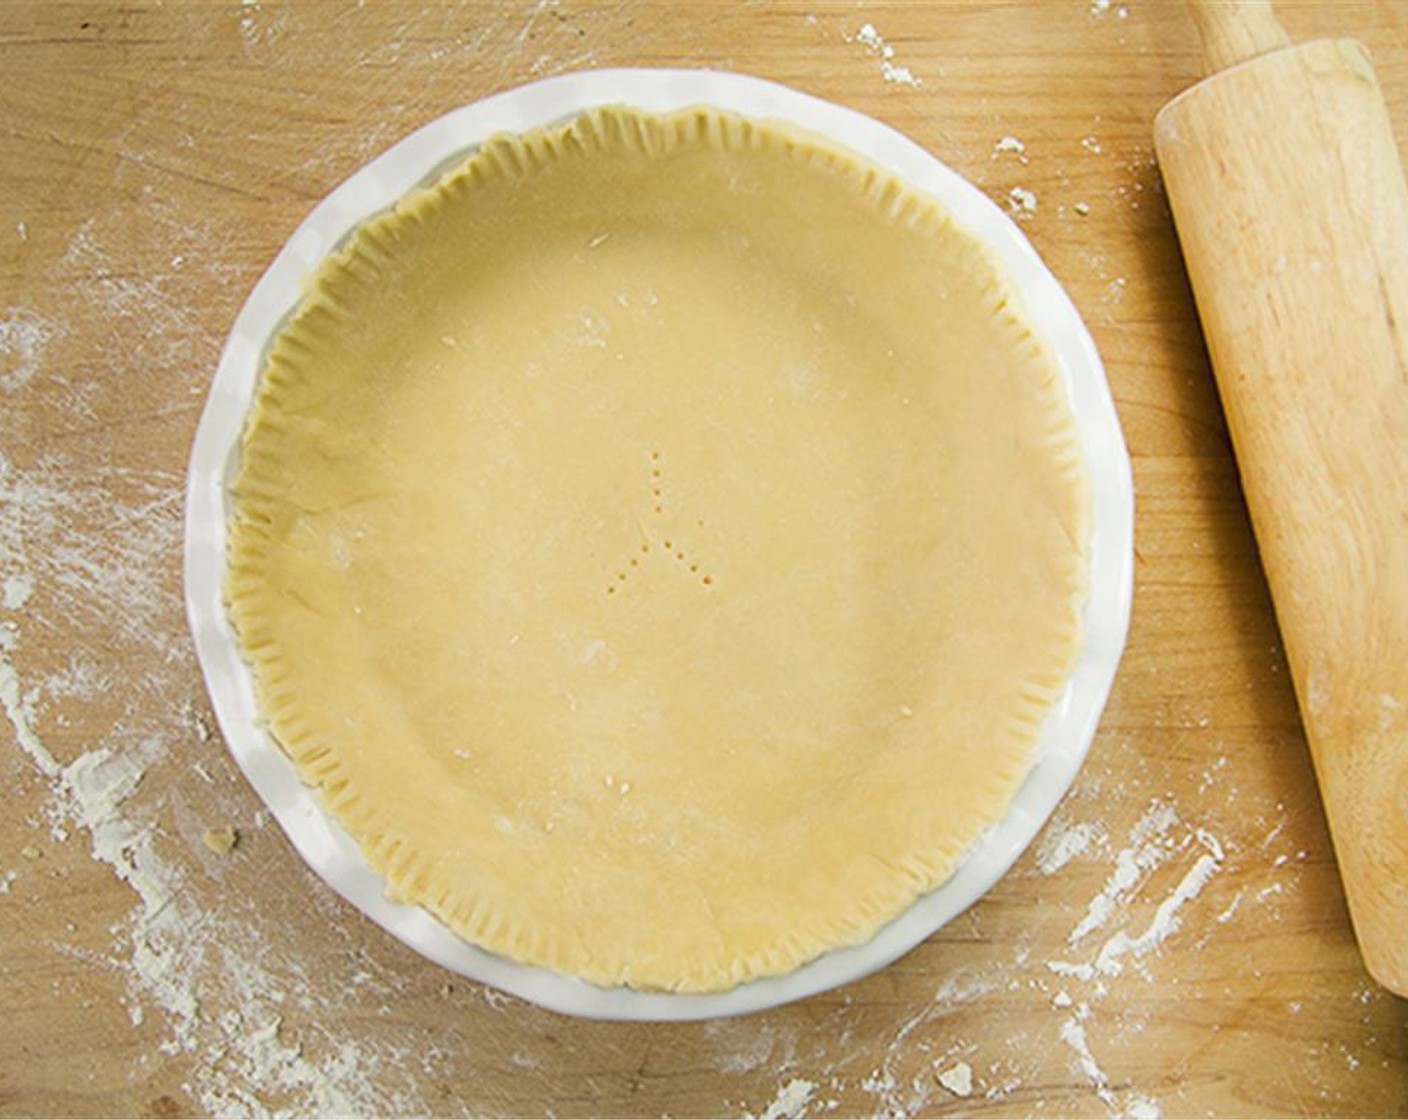 step 5 Bake pie shell for 12 minutes at 350 degrees F (180 degrees C).